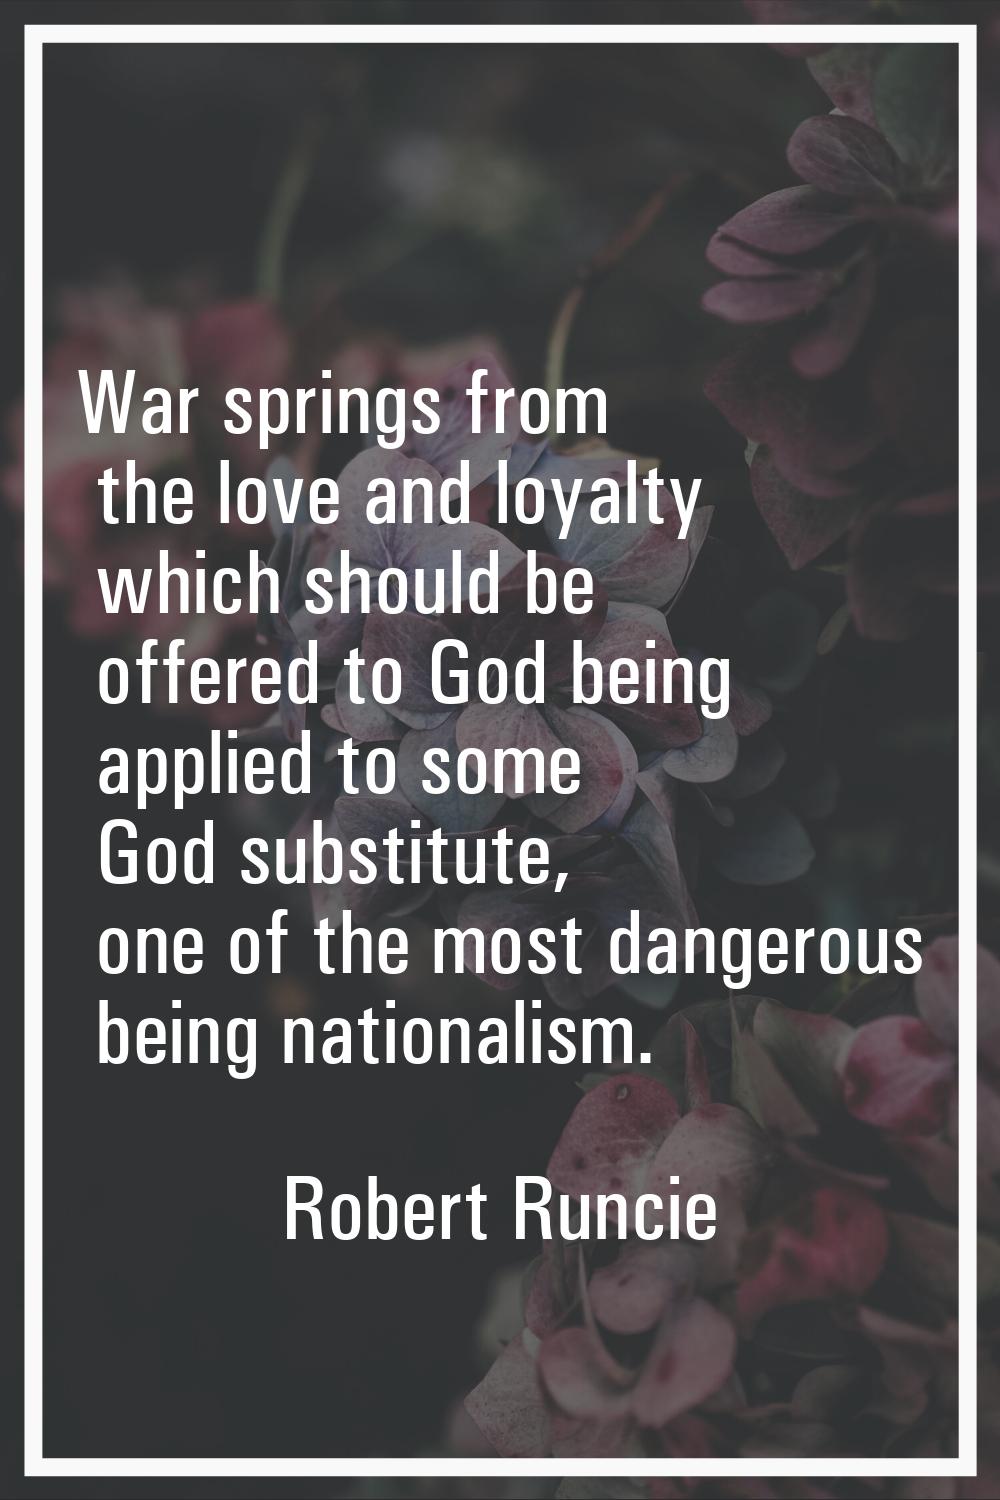 War springs from the love and loyalty which should be offered to God being applied to some God subs